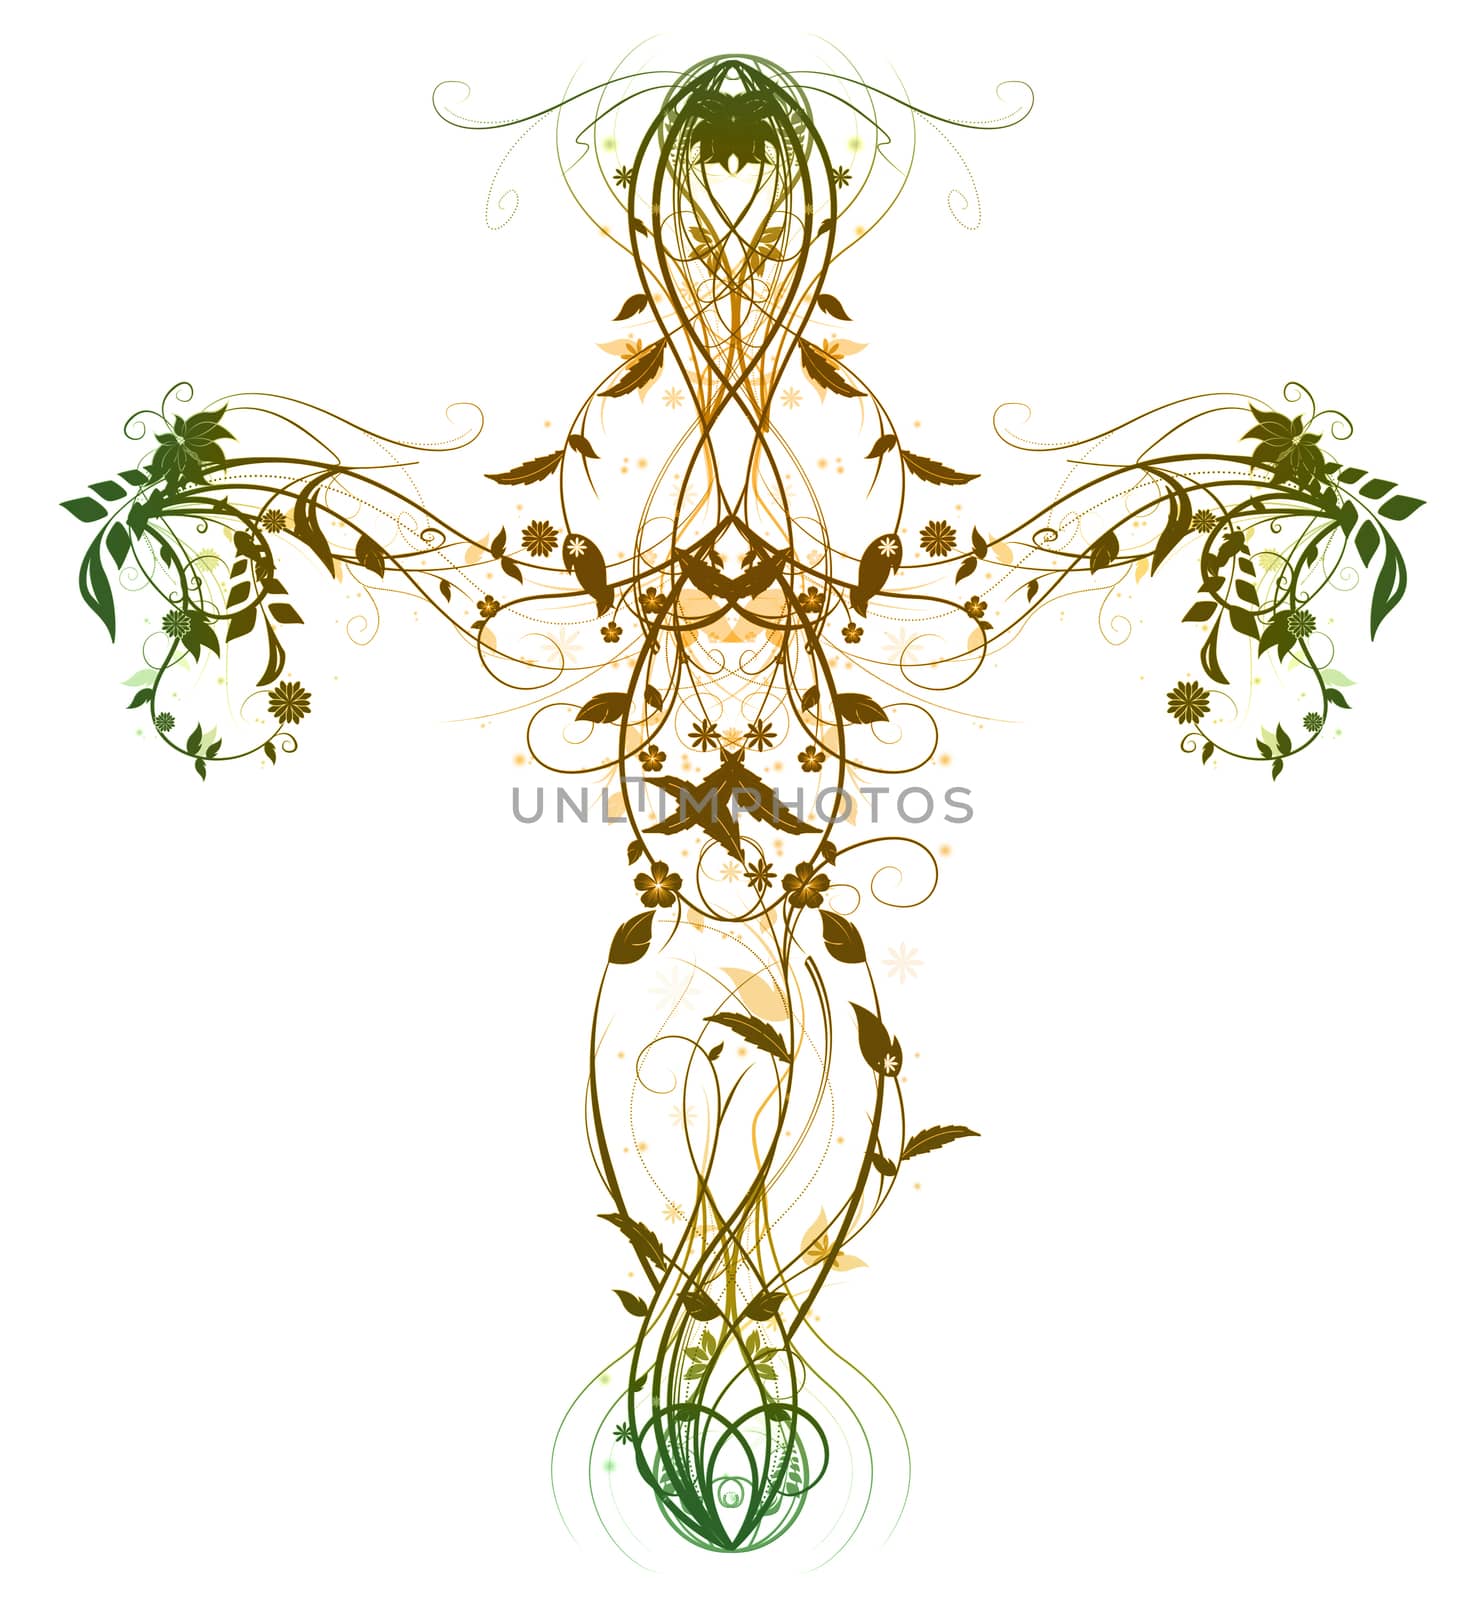 Green Floral Cross made with bevel and  emboss effect isolated on white